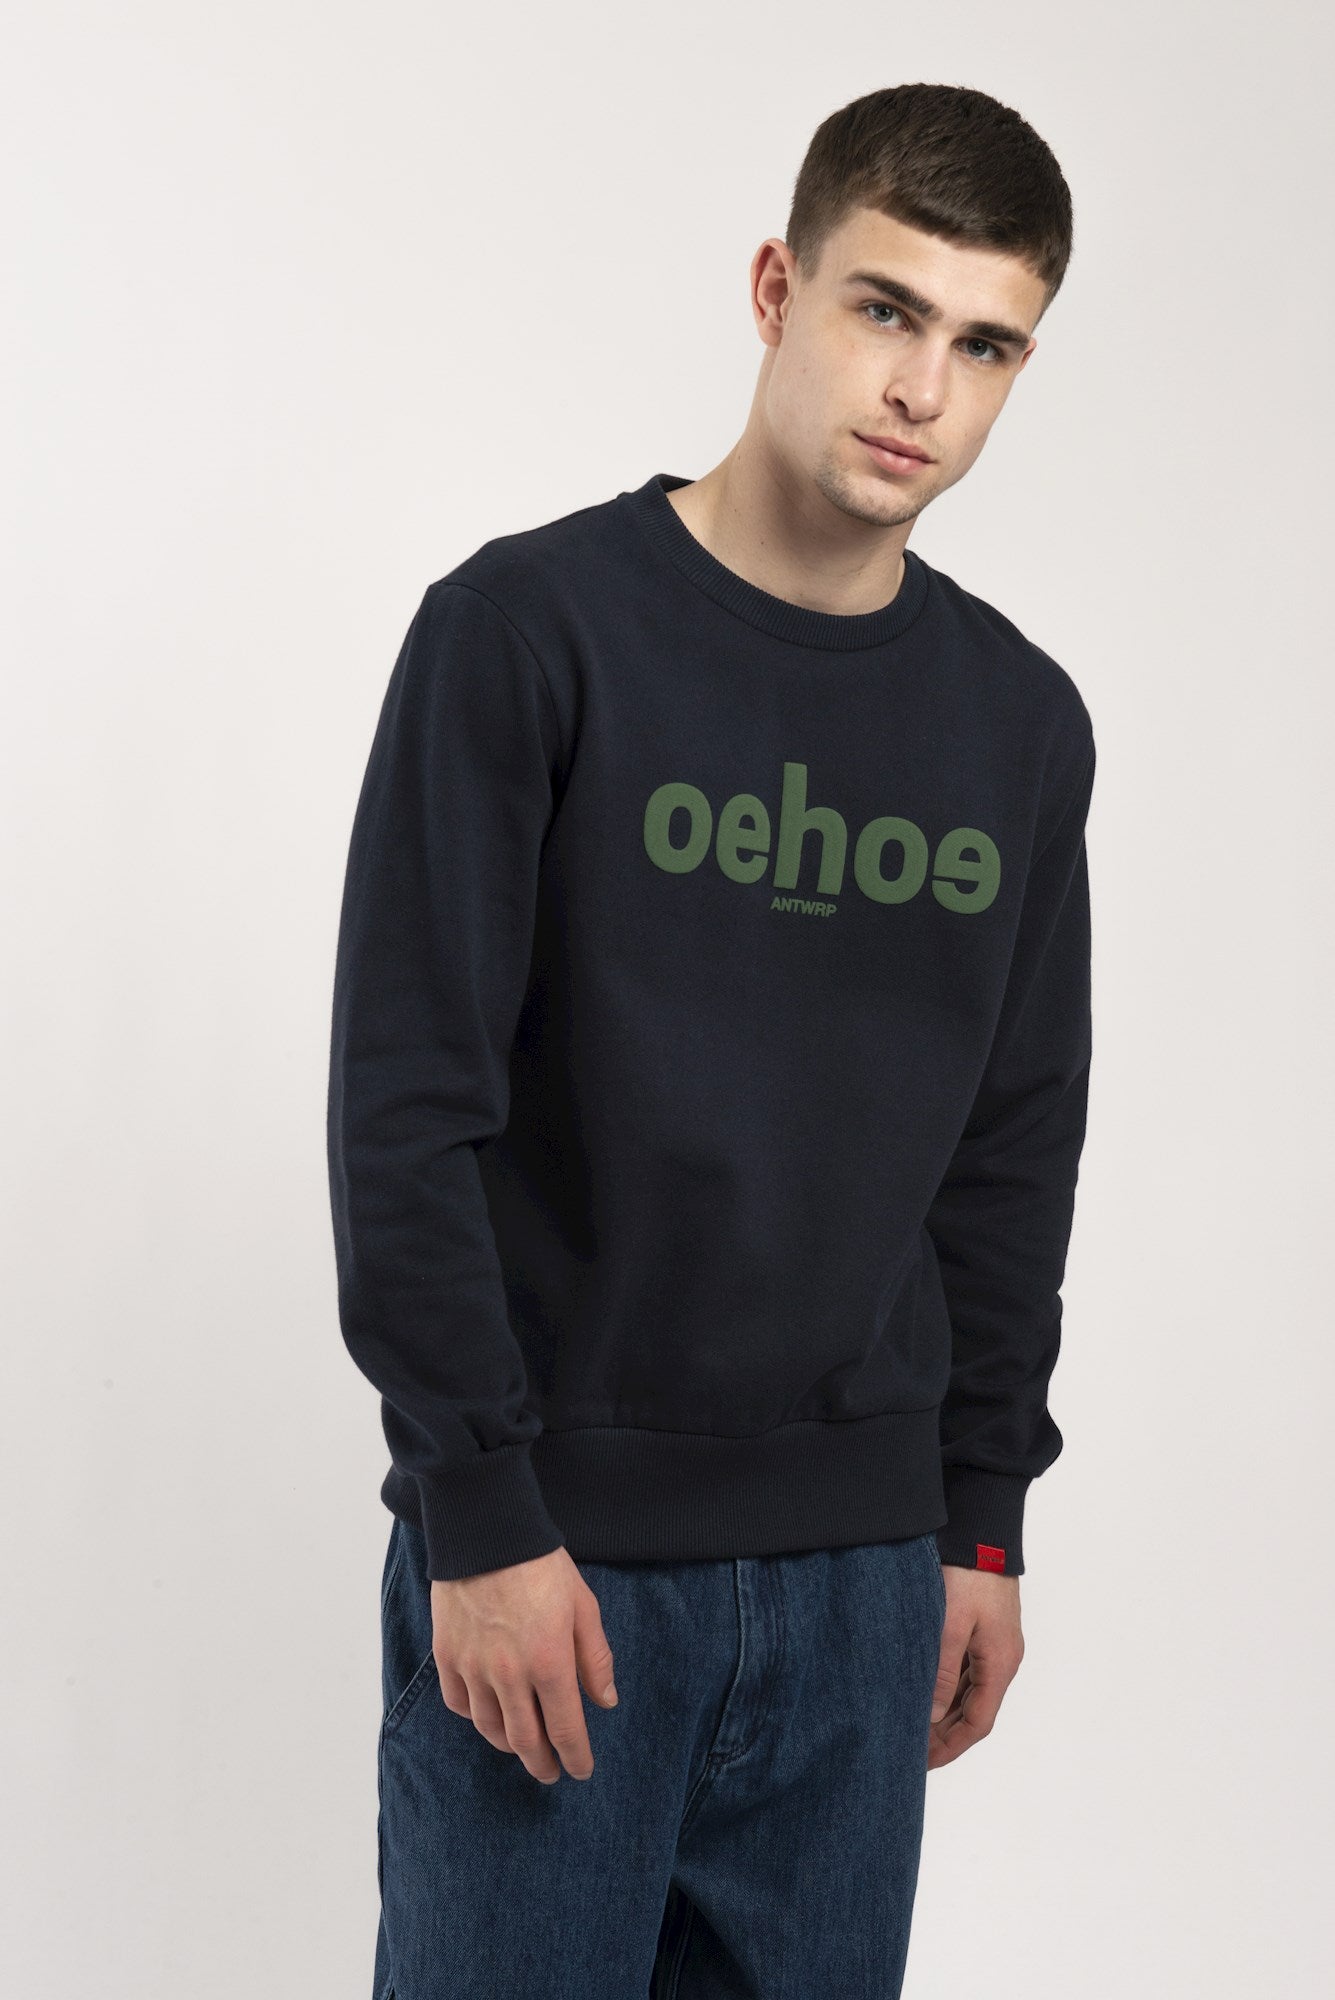 Sweater oehoe